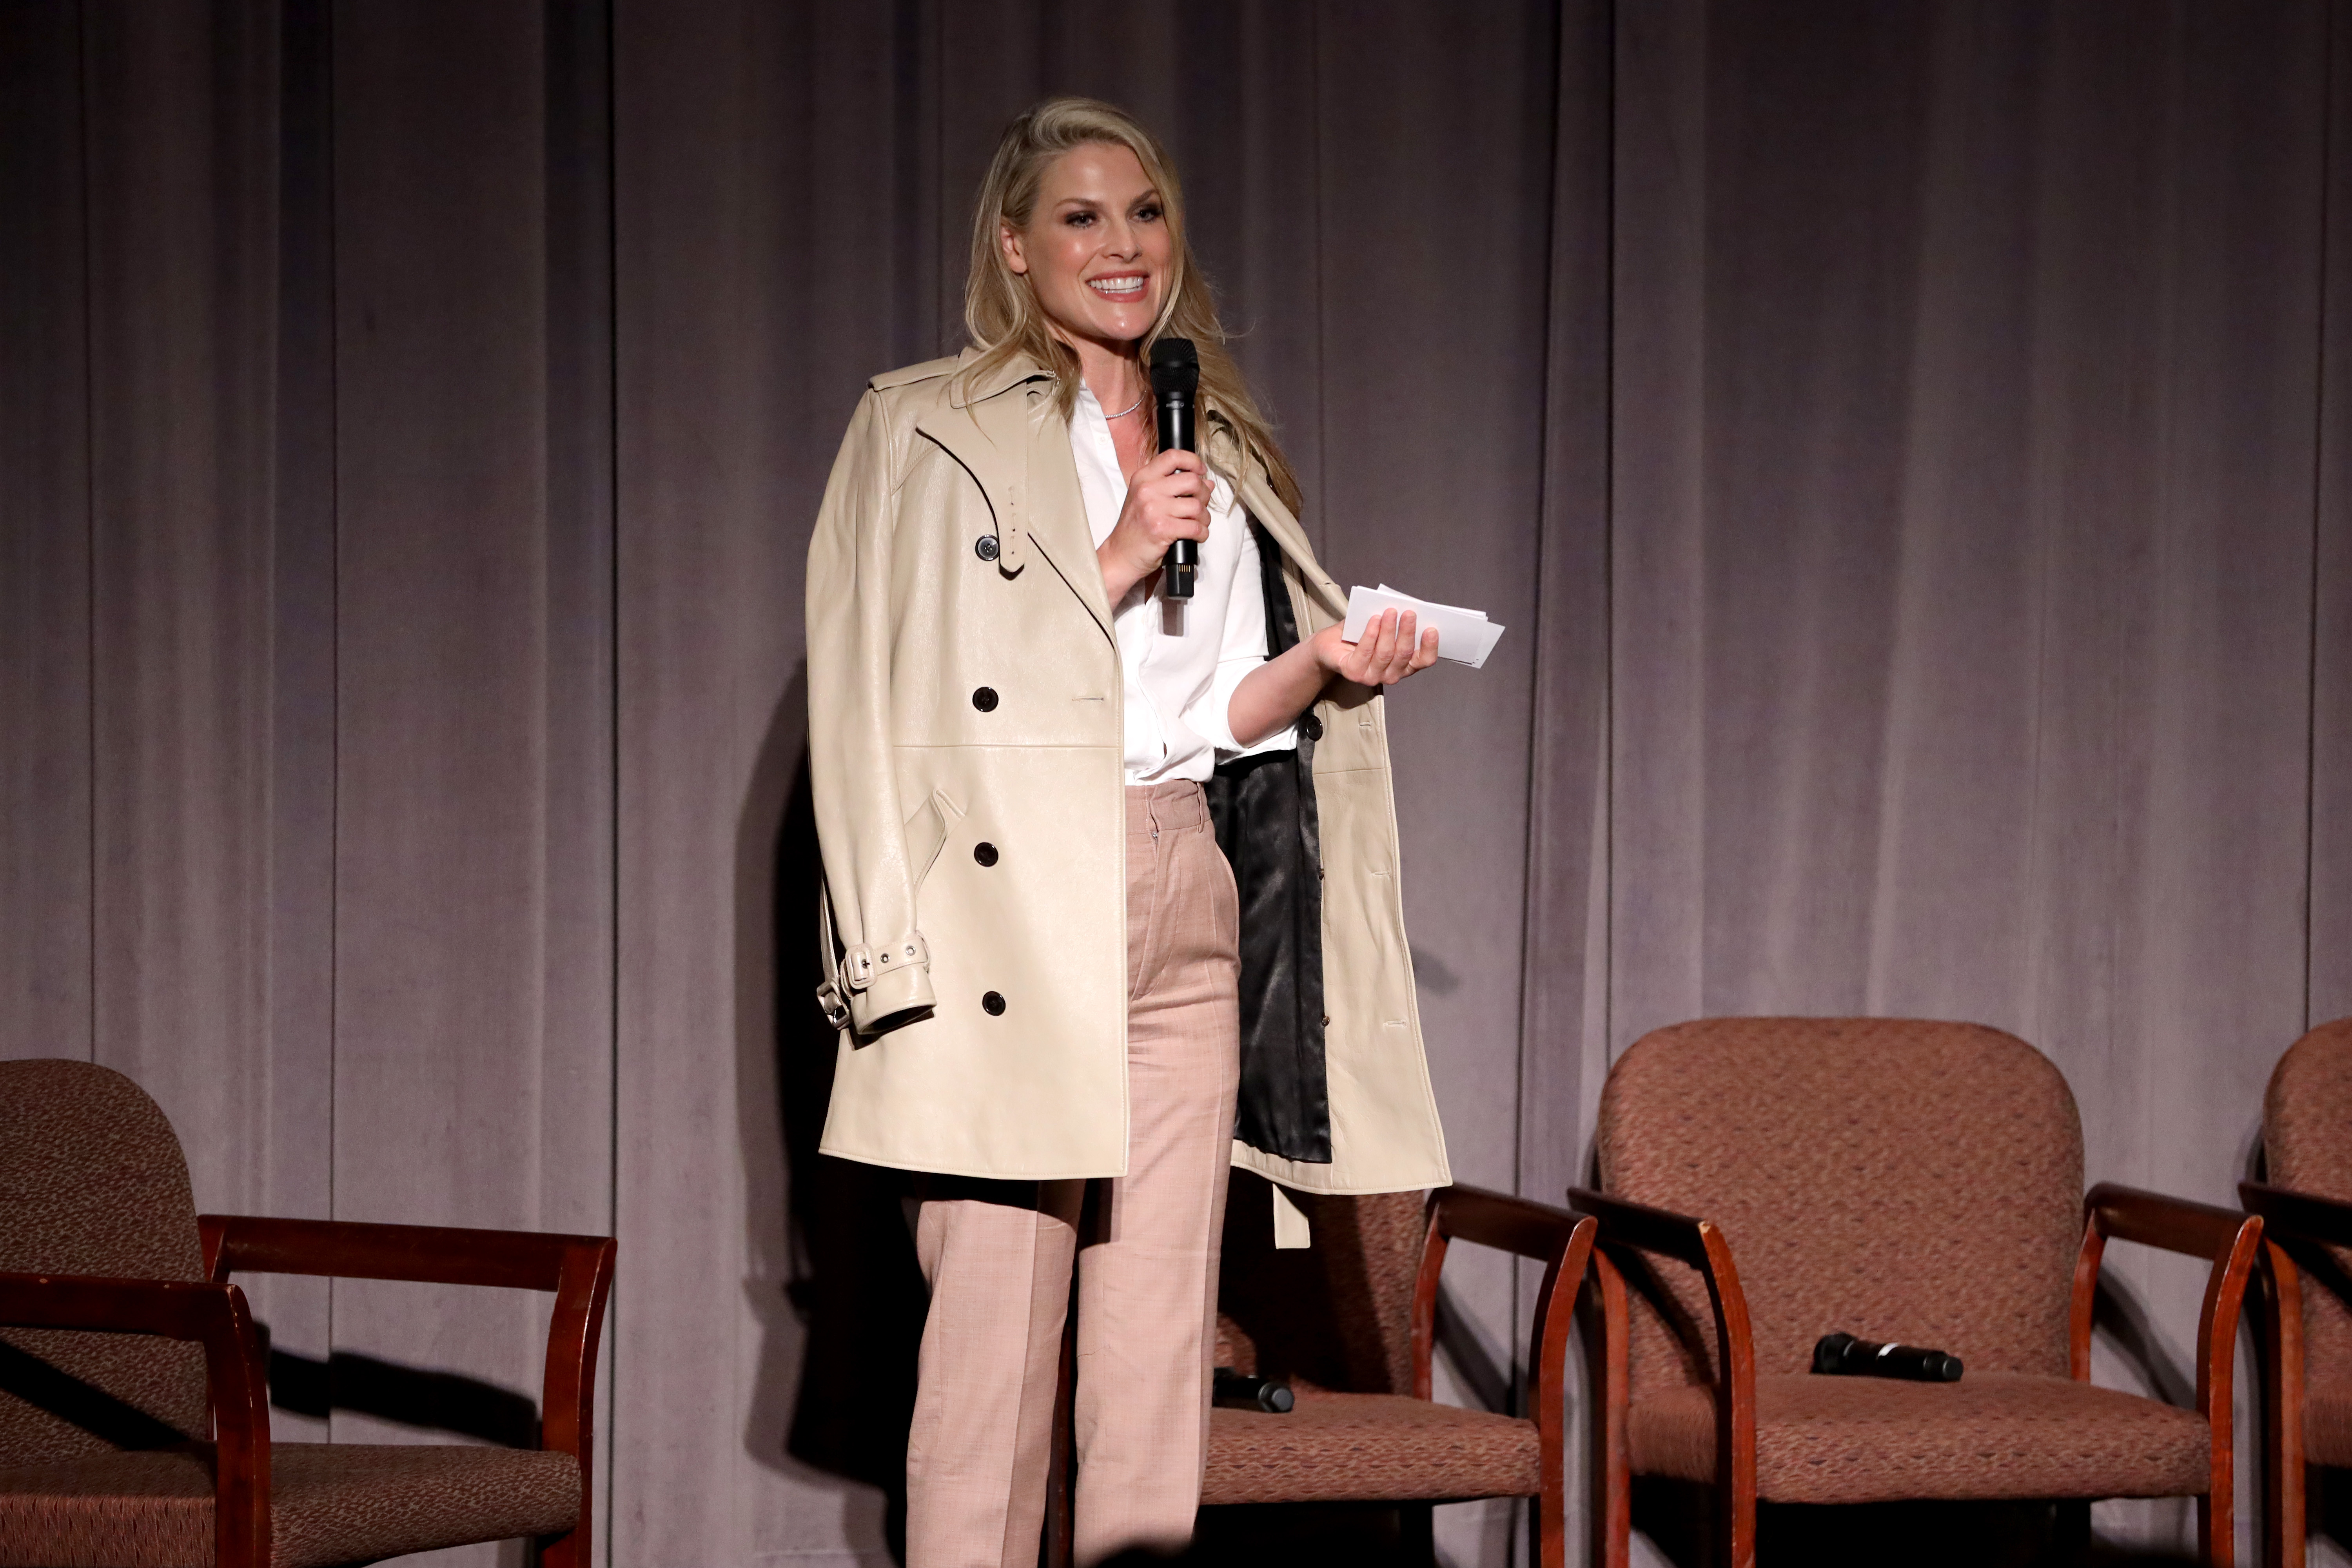 Ali Larter speaks onstage during the "Momentum Shift" film premiere at the Directors Guild Of America